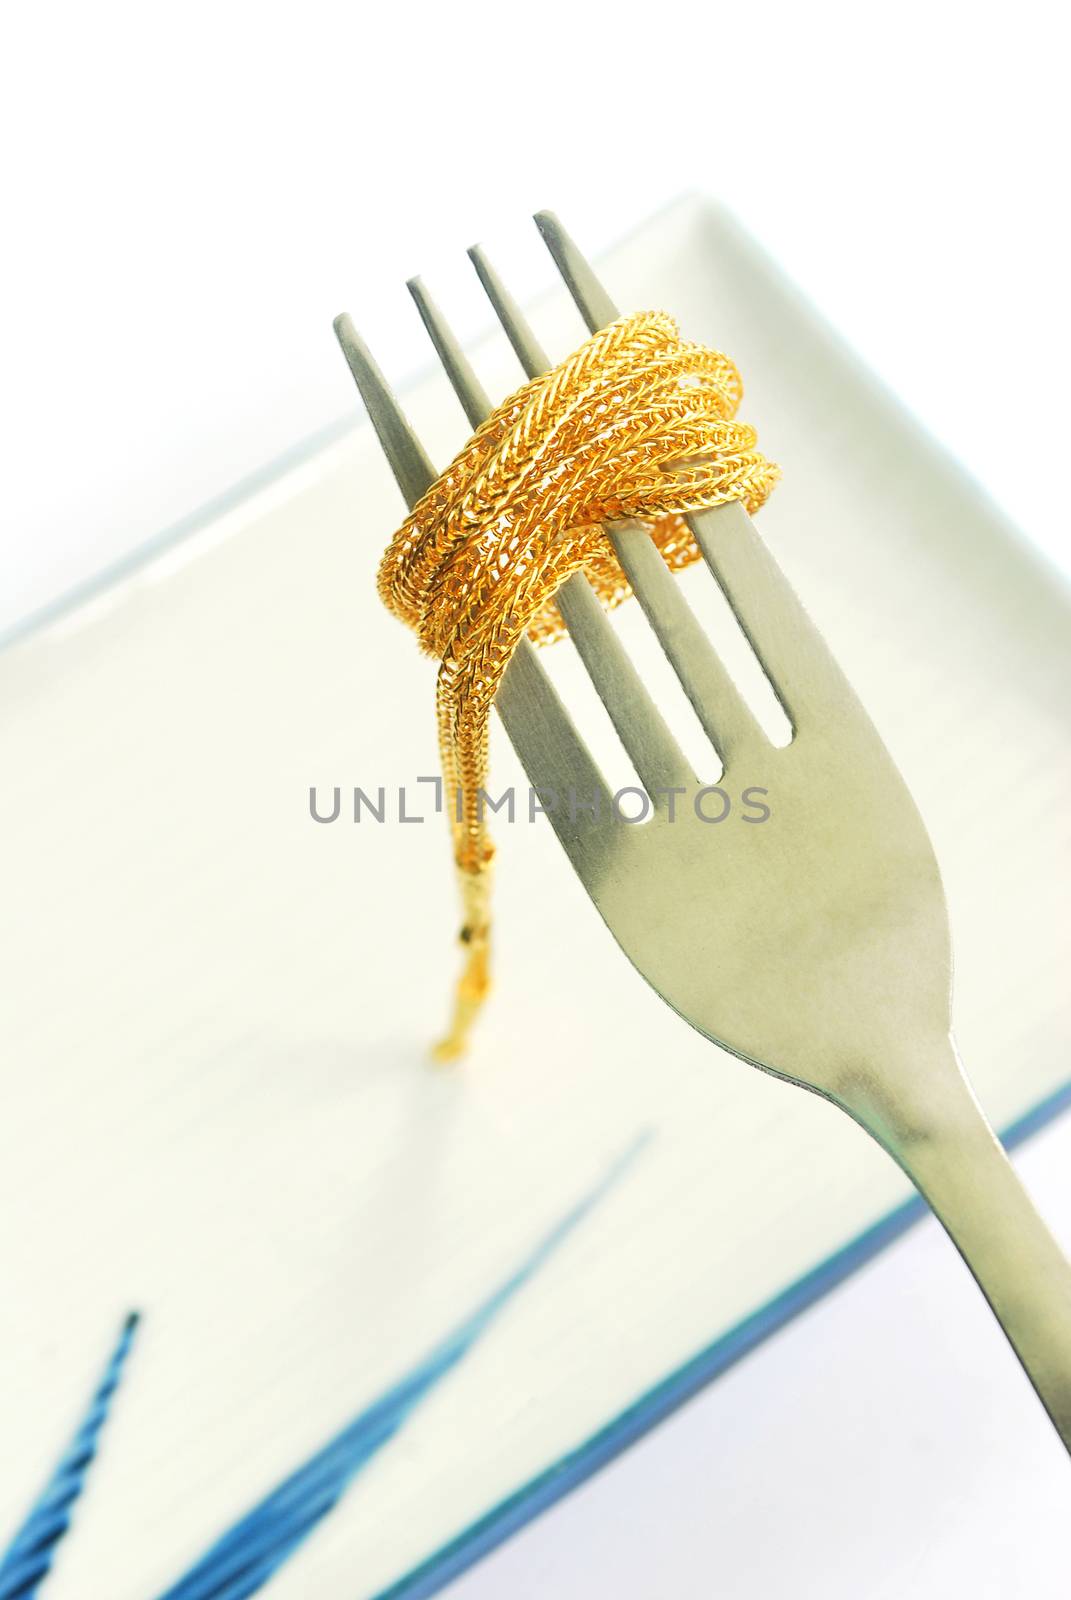 The gold neck weighs about 0.5 grams on the cutlery on white background.